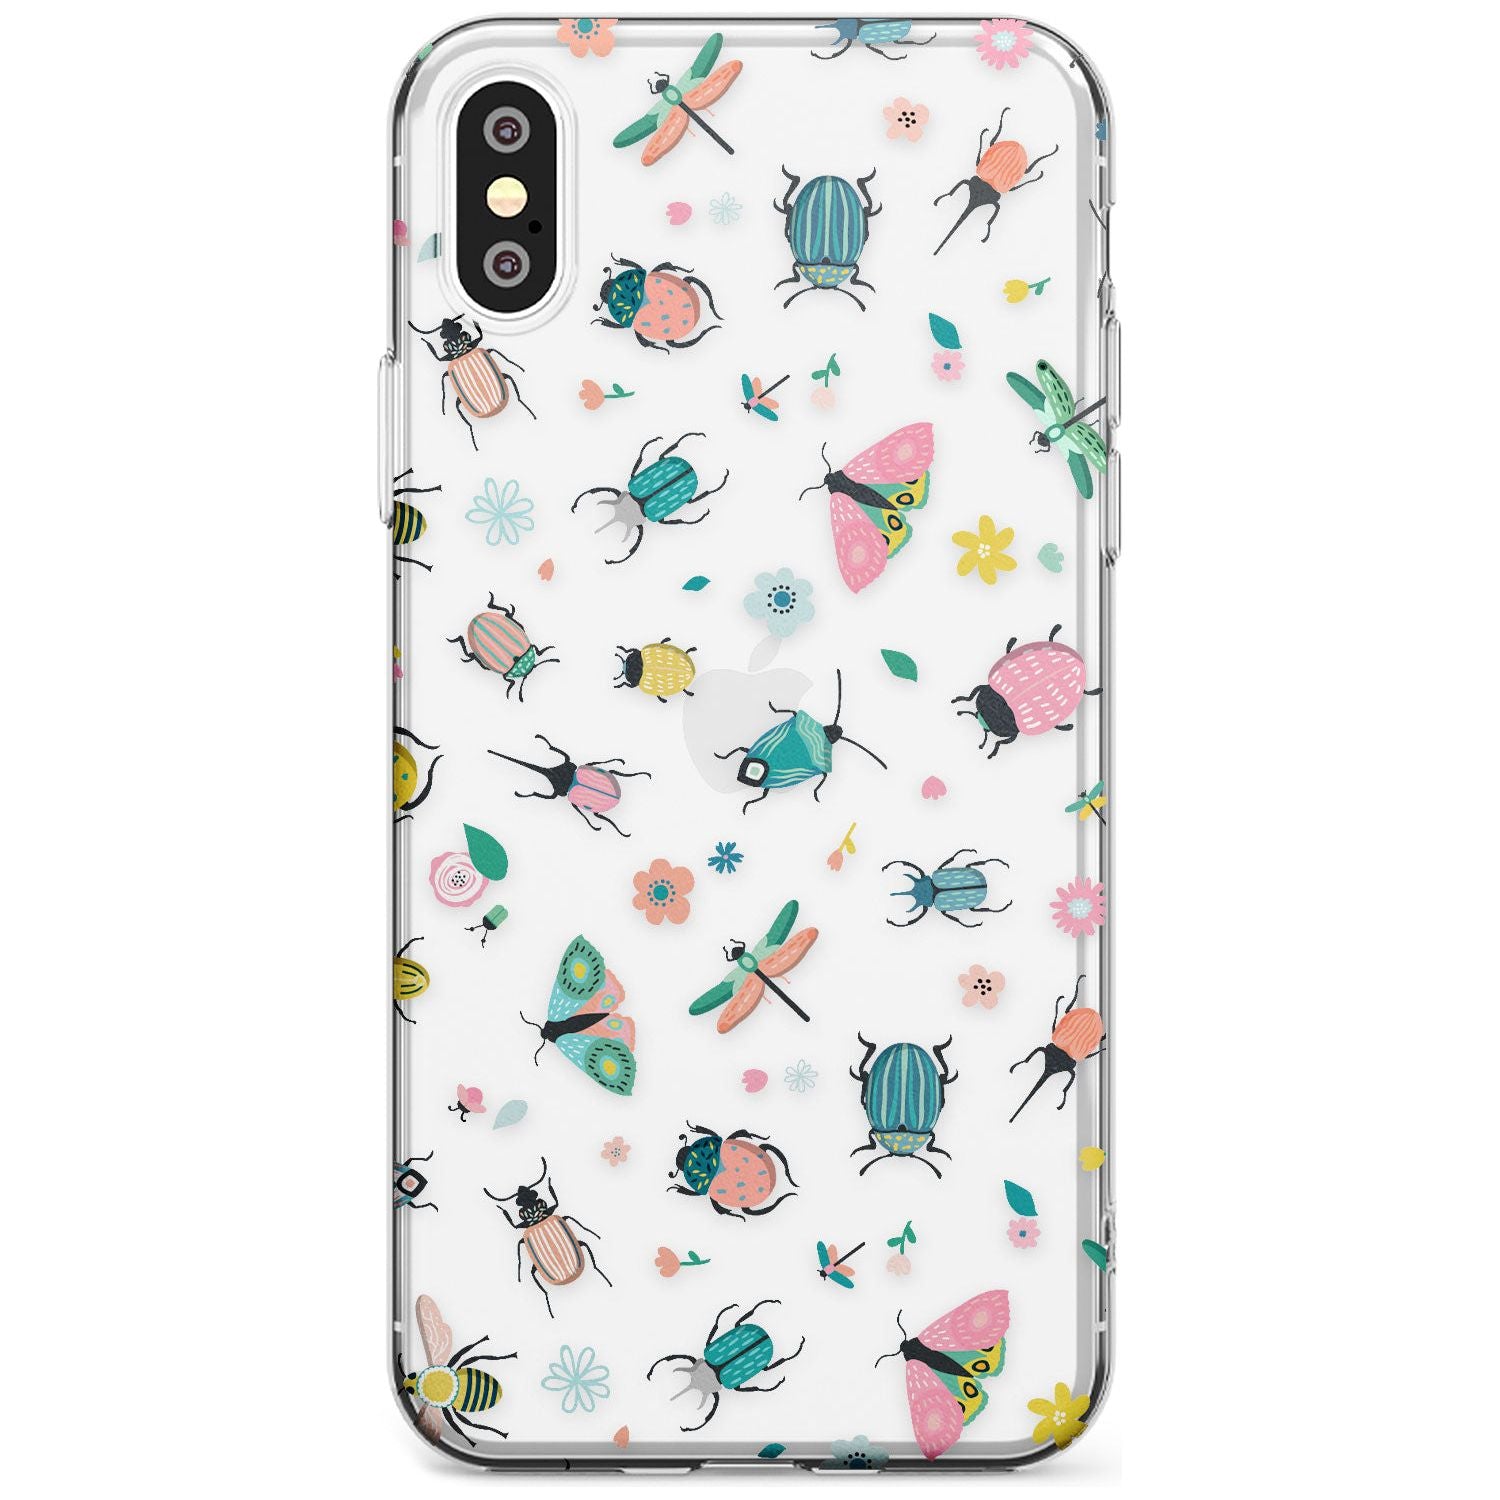 Spring Insects Black Impact Phone Case for iPhone X XS Max XR